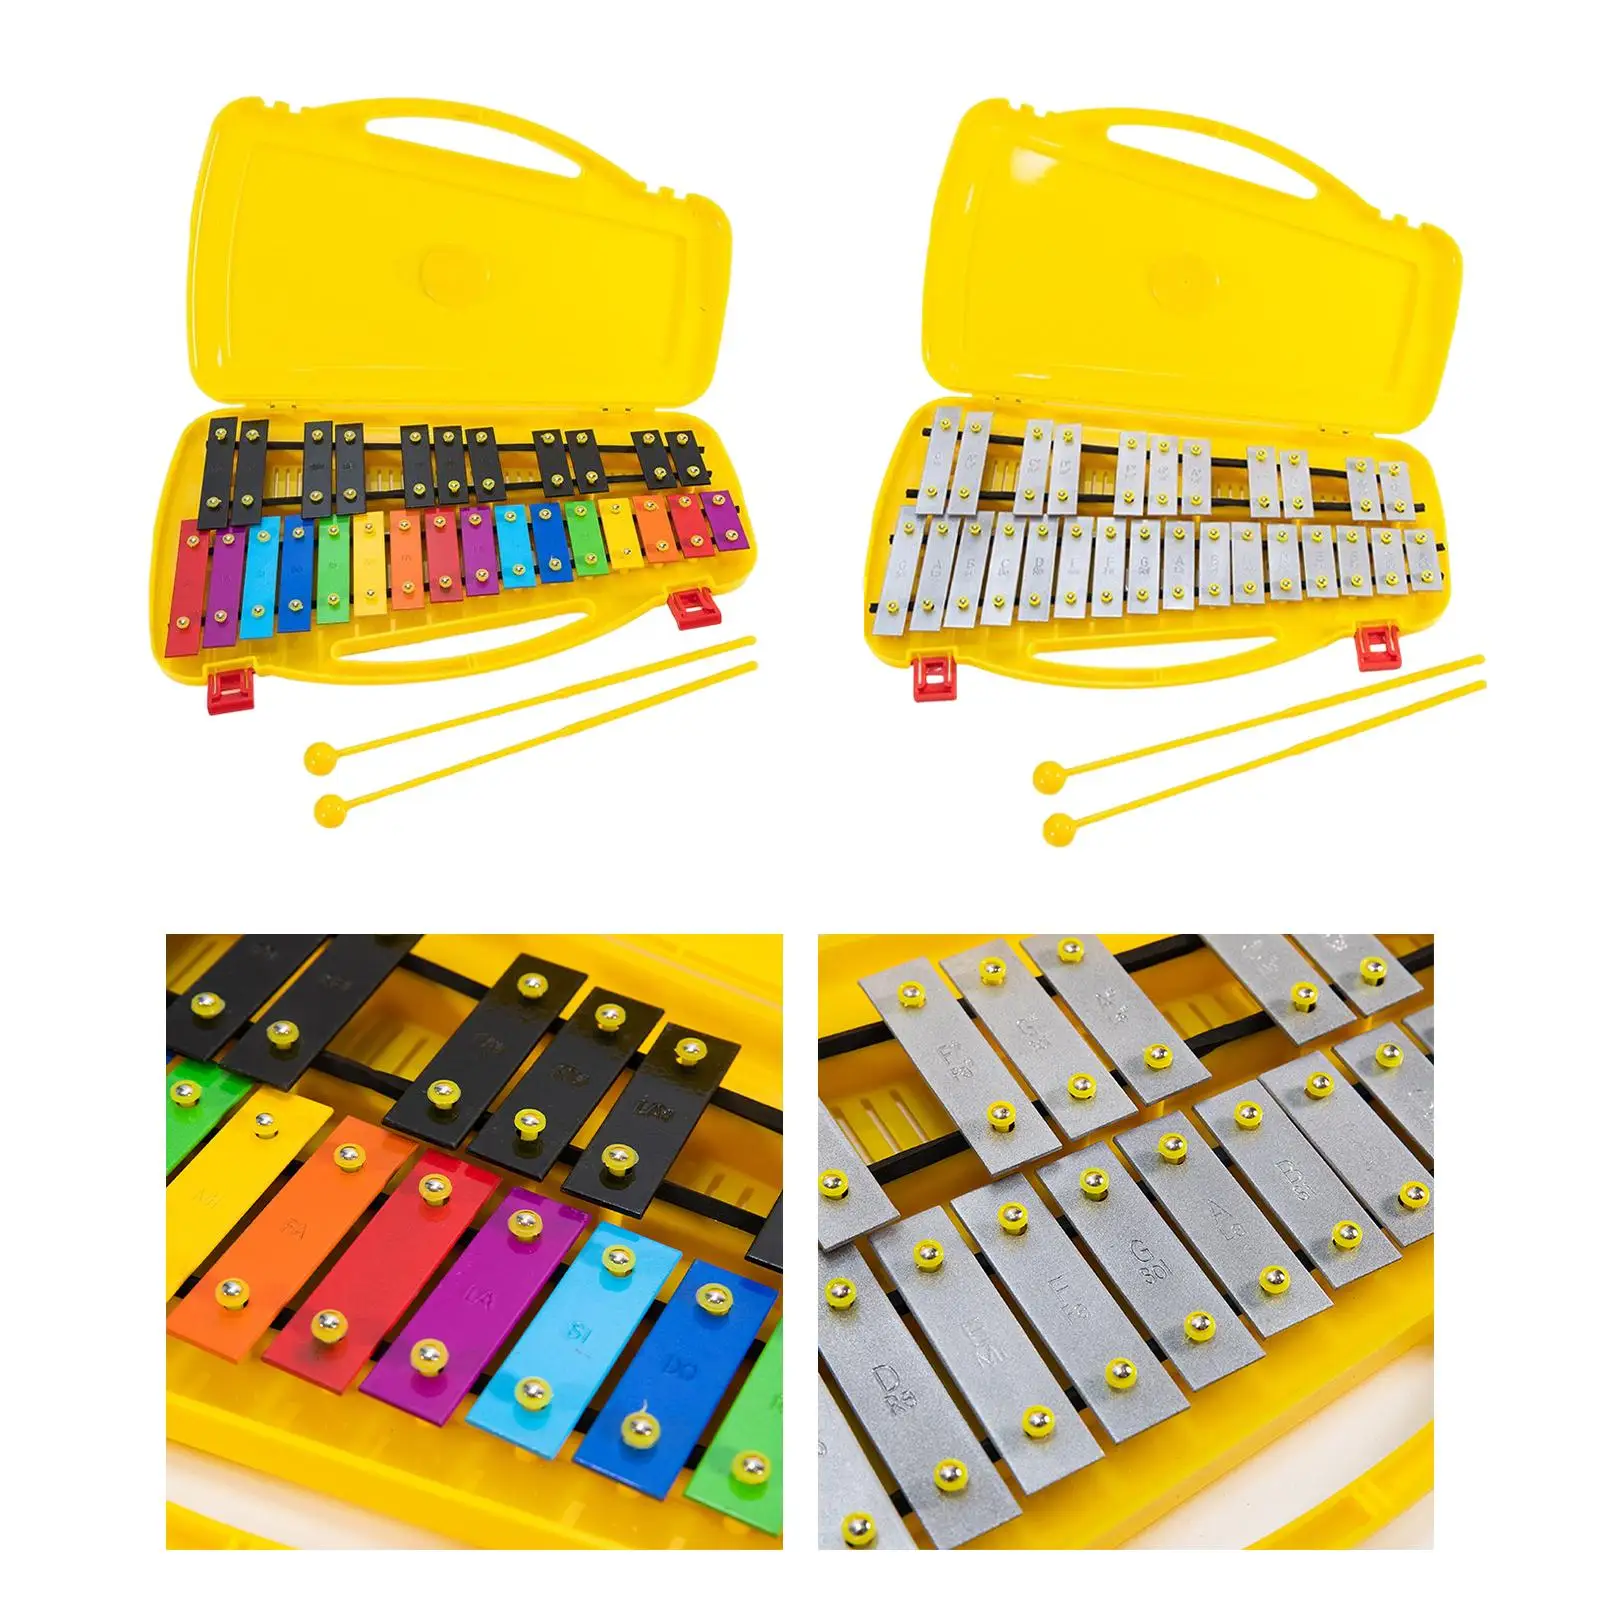 Glockenspiel Perfectly Gift and Two Mallets with 27 Note Xylophone for Toddlers Baby Adult Children Percussion Instruments